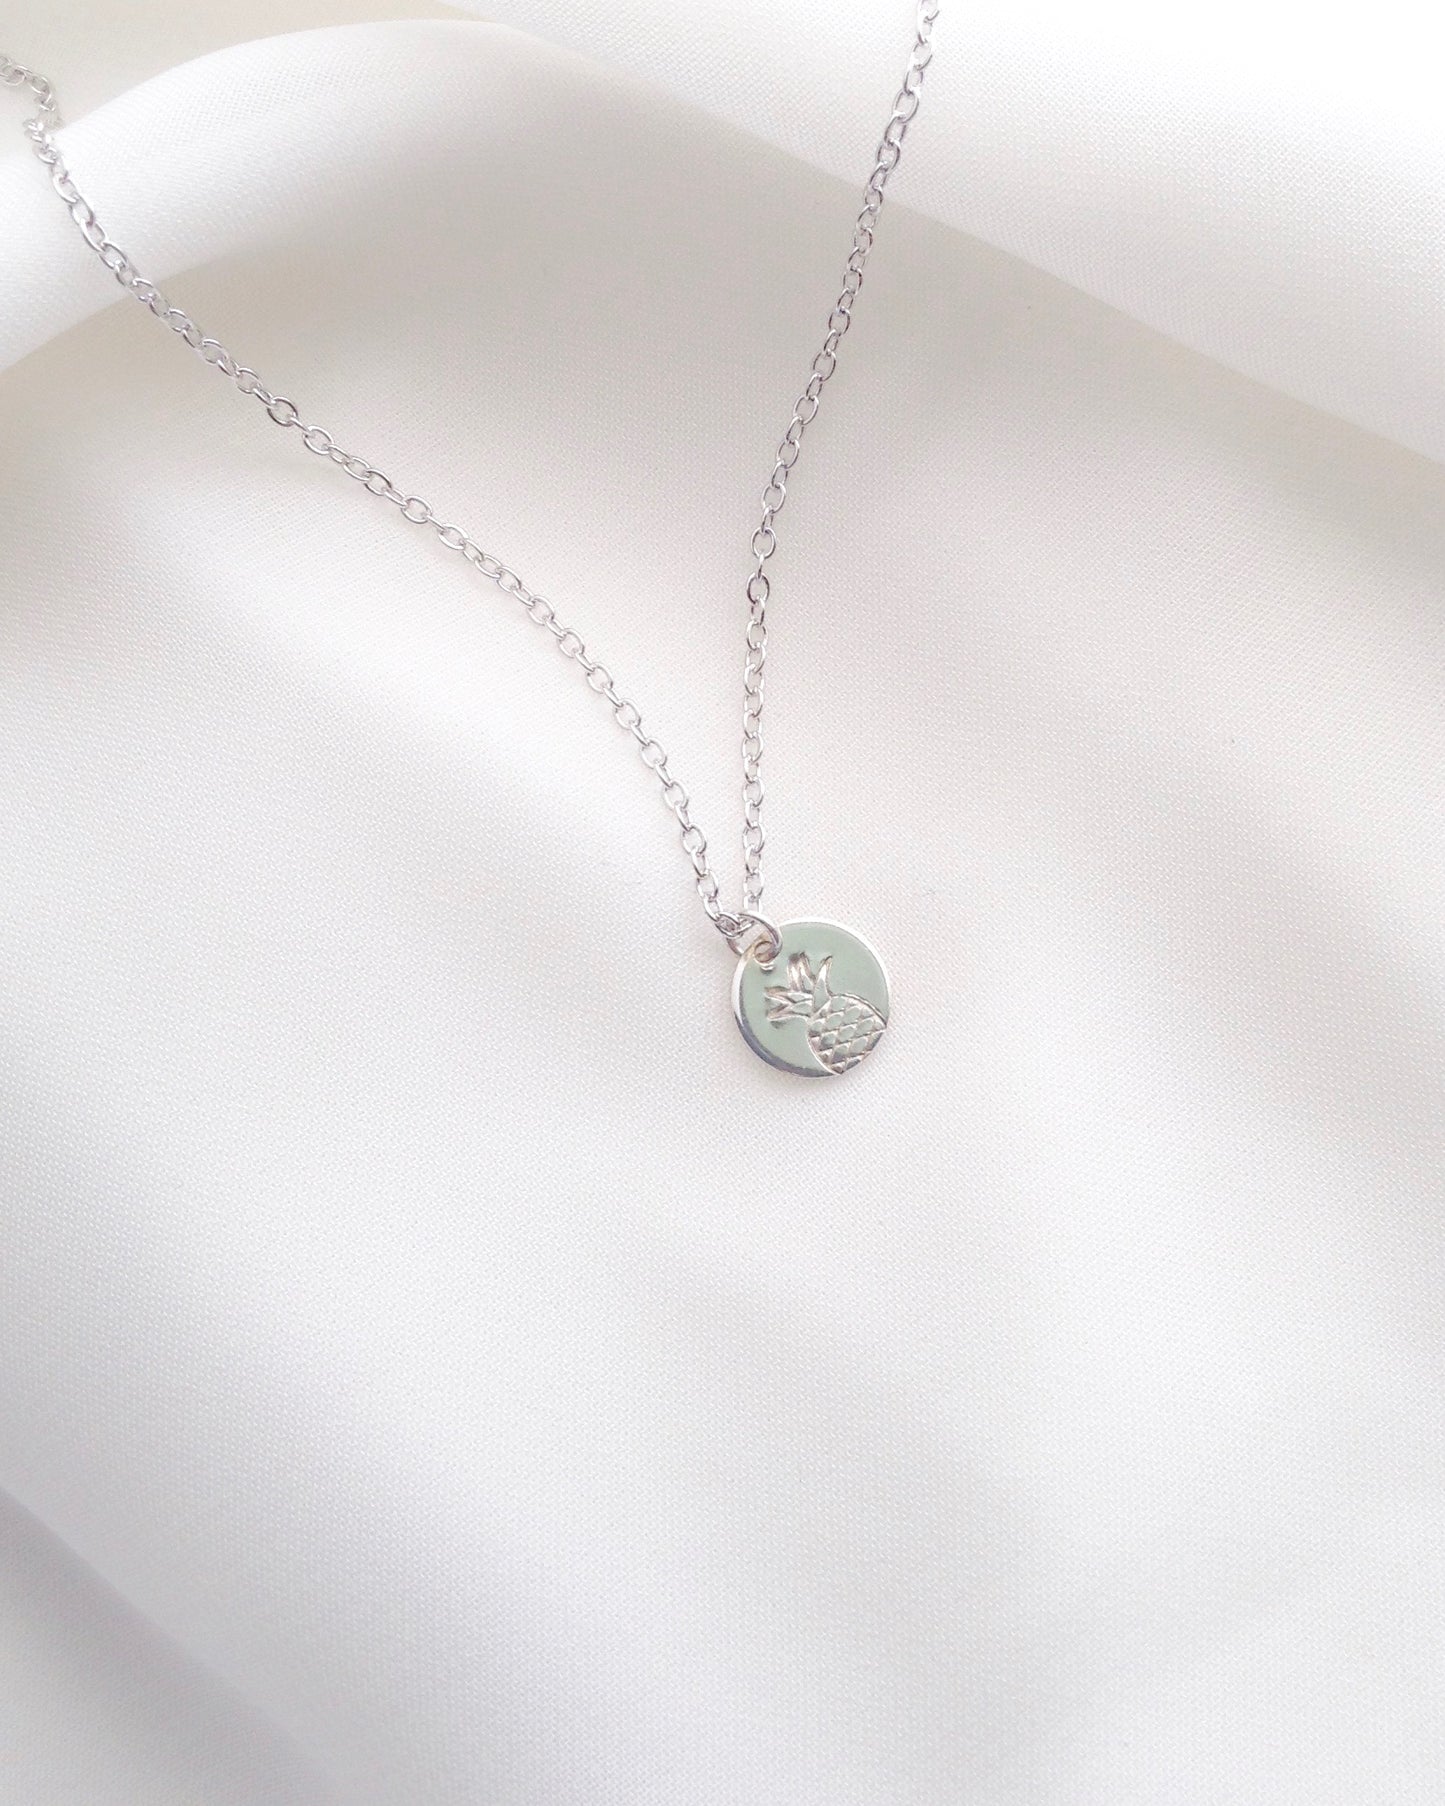 Silver Pineapple Necklace | Small Dainty Necklace | IB Jewelry